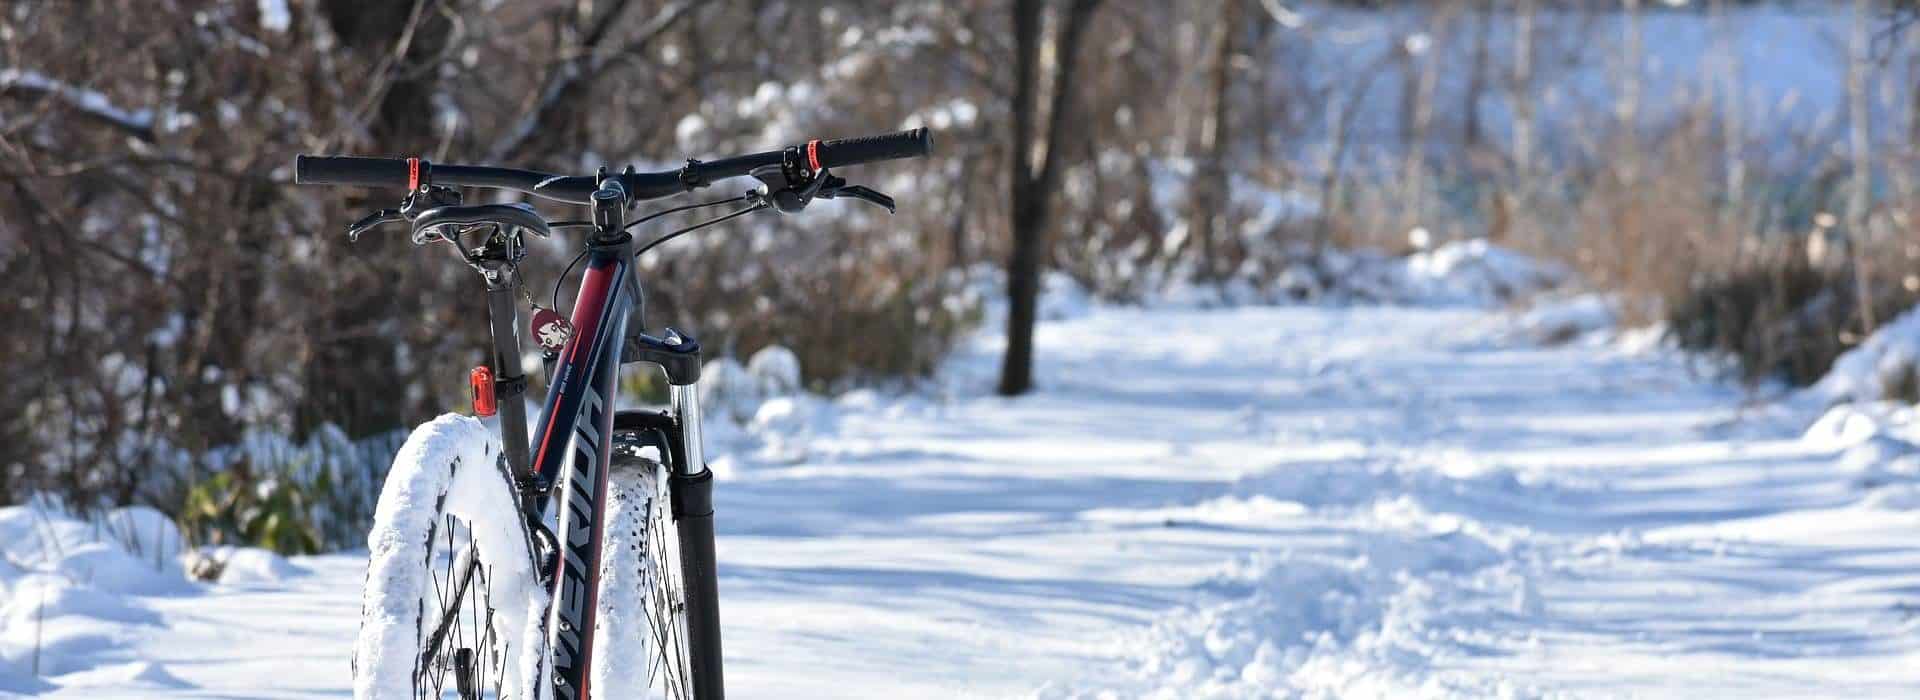 Mountain bike with snow covered tires on snow path surrounded by trees